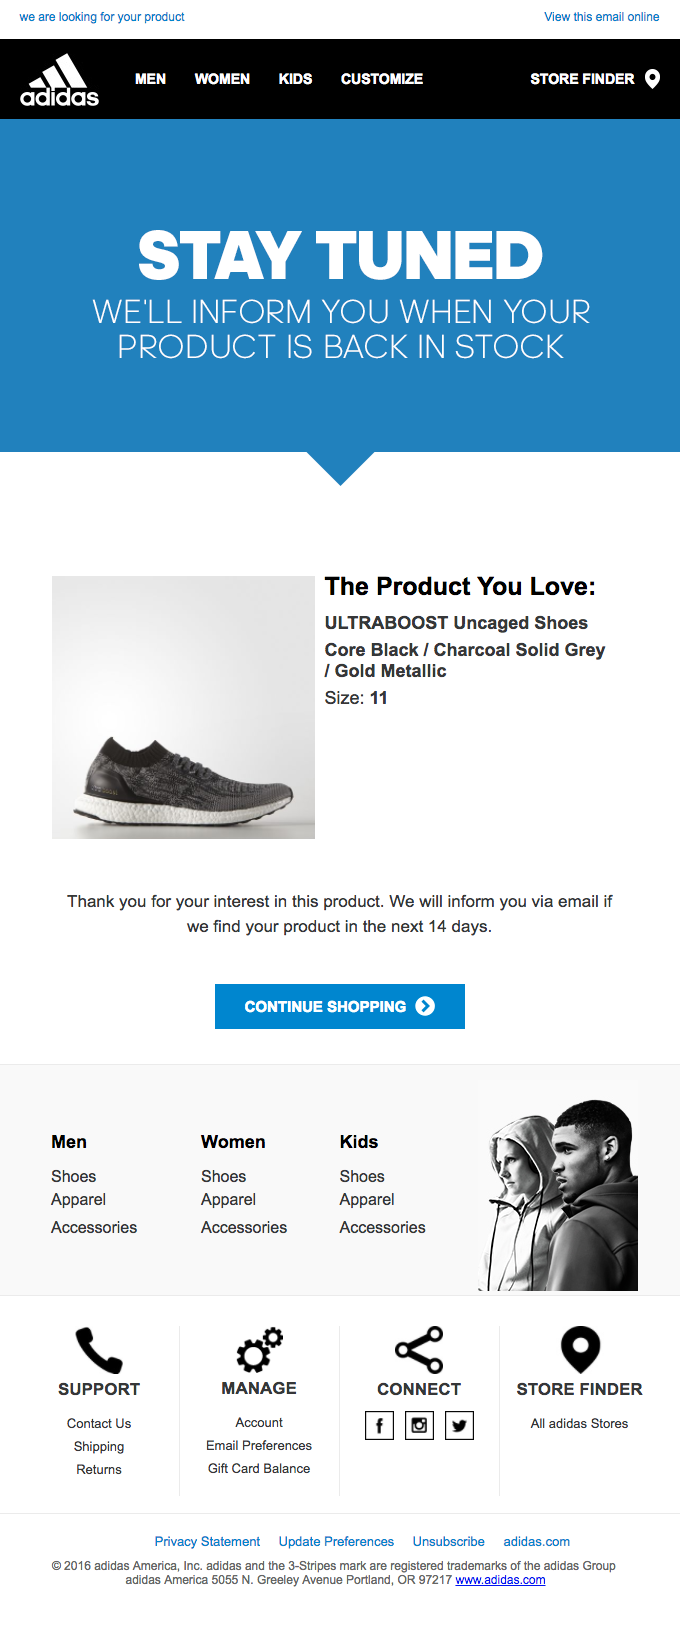 We will find it for you - Adidas Email Newsletter